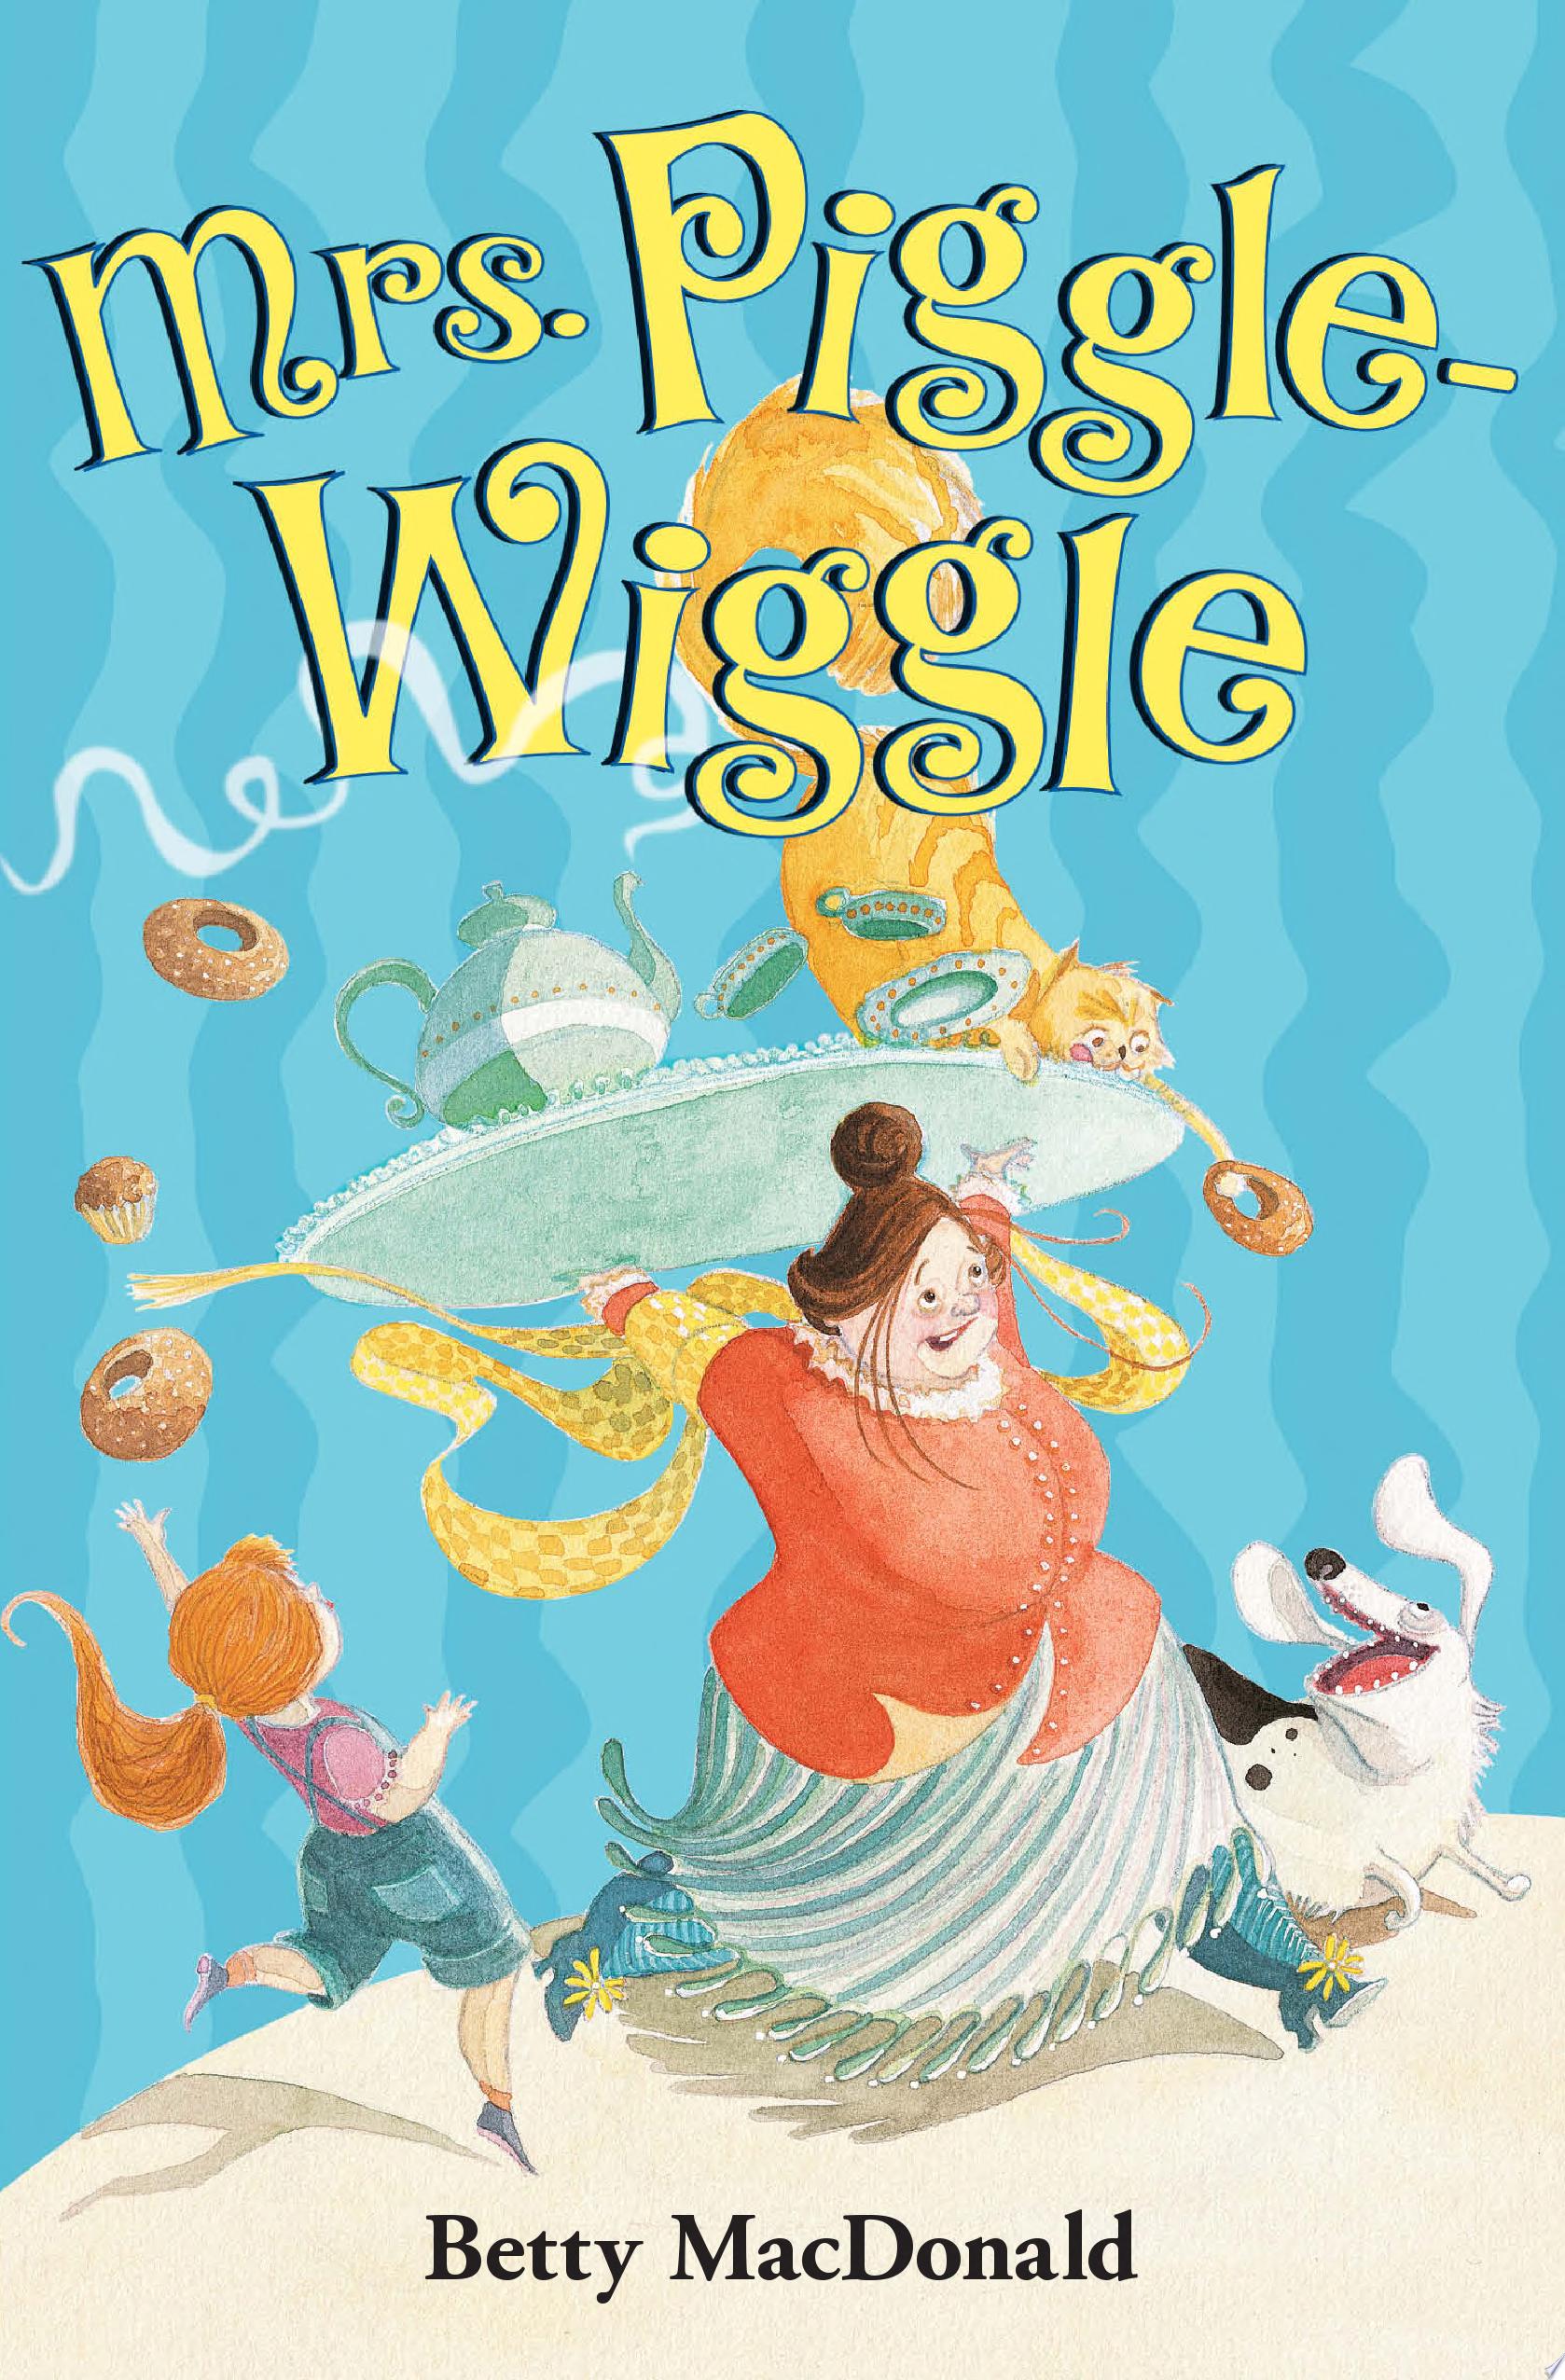 Image for "Mrs. Piggle-Wiggle"